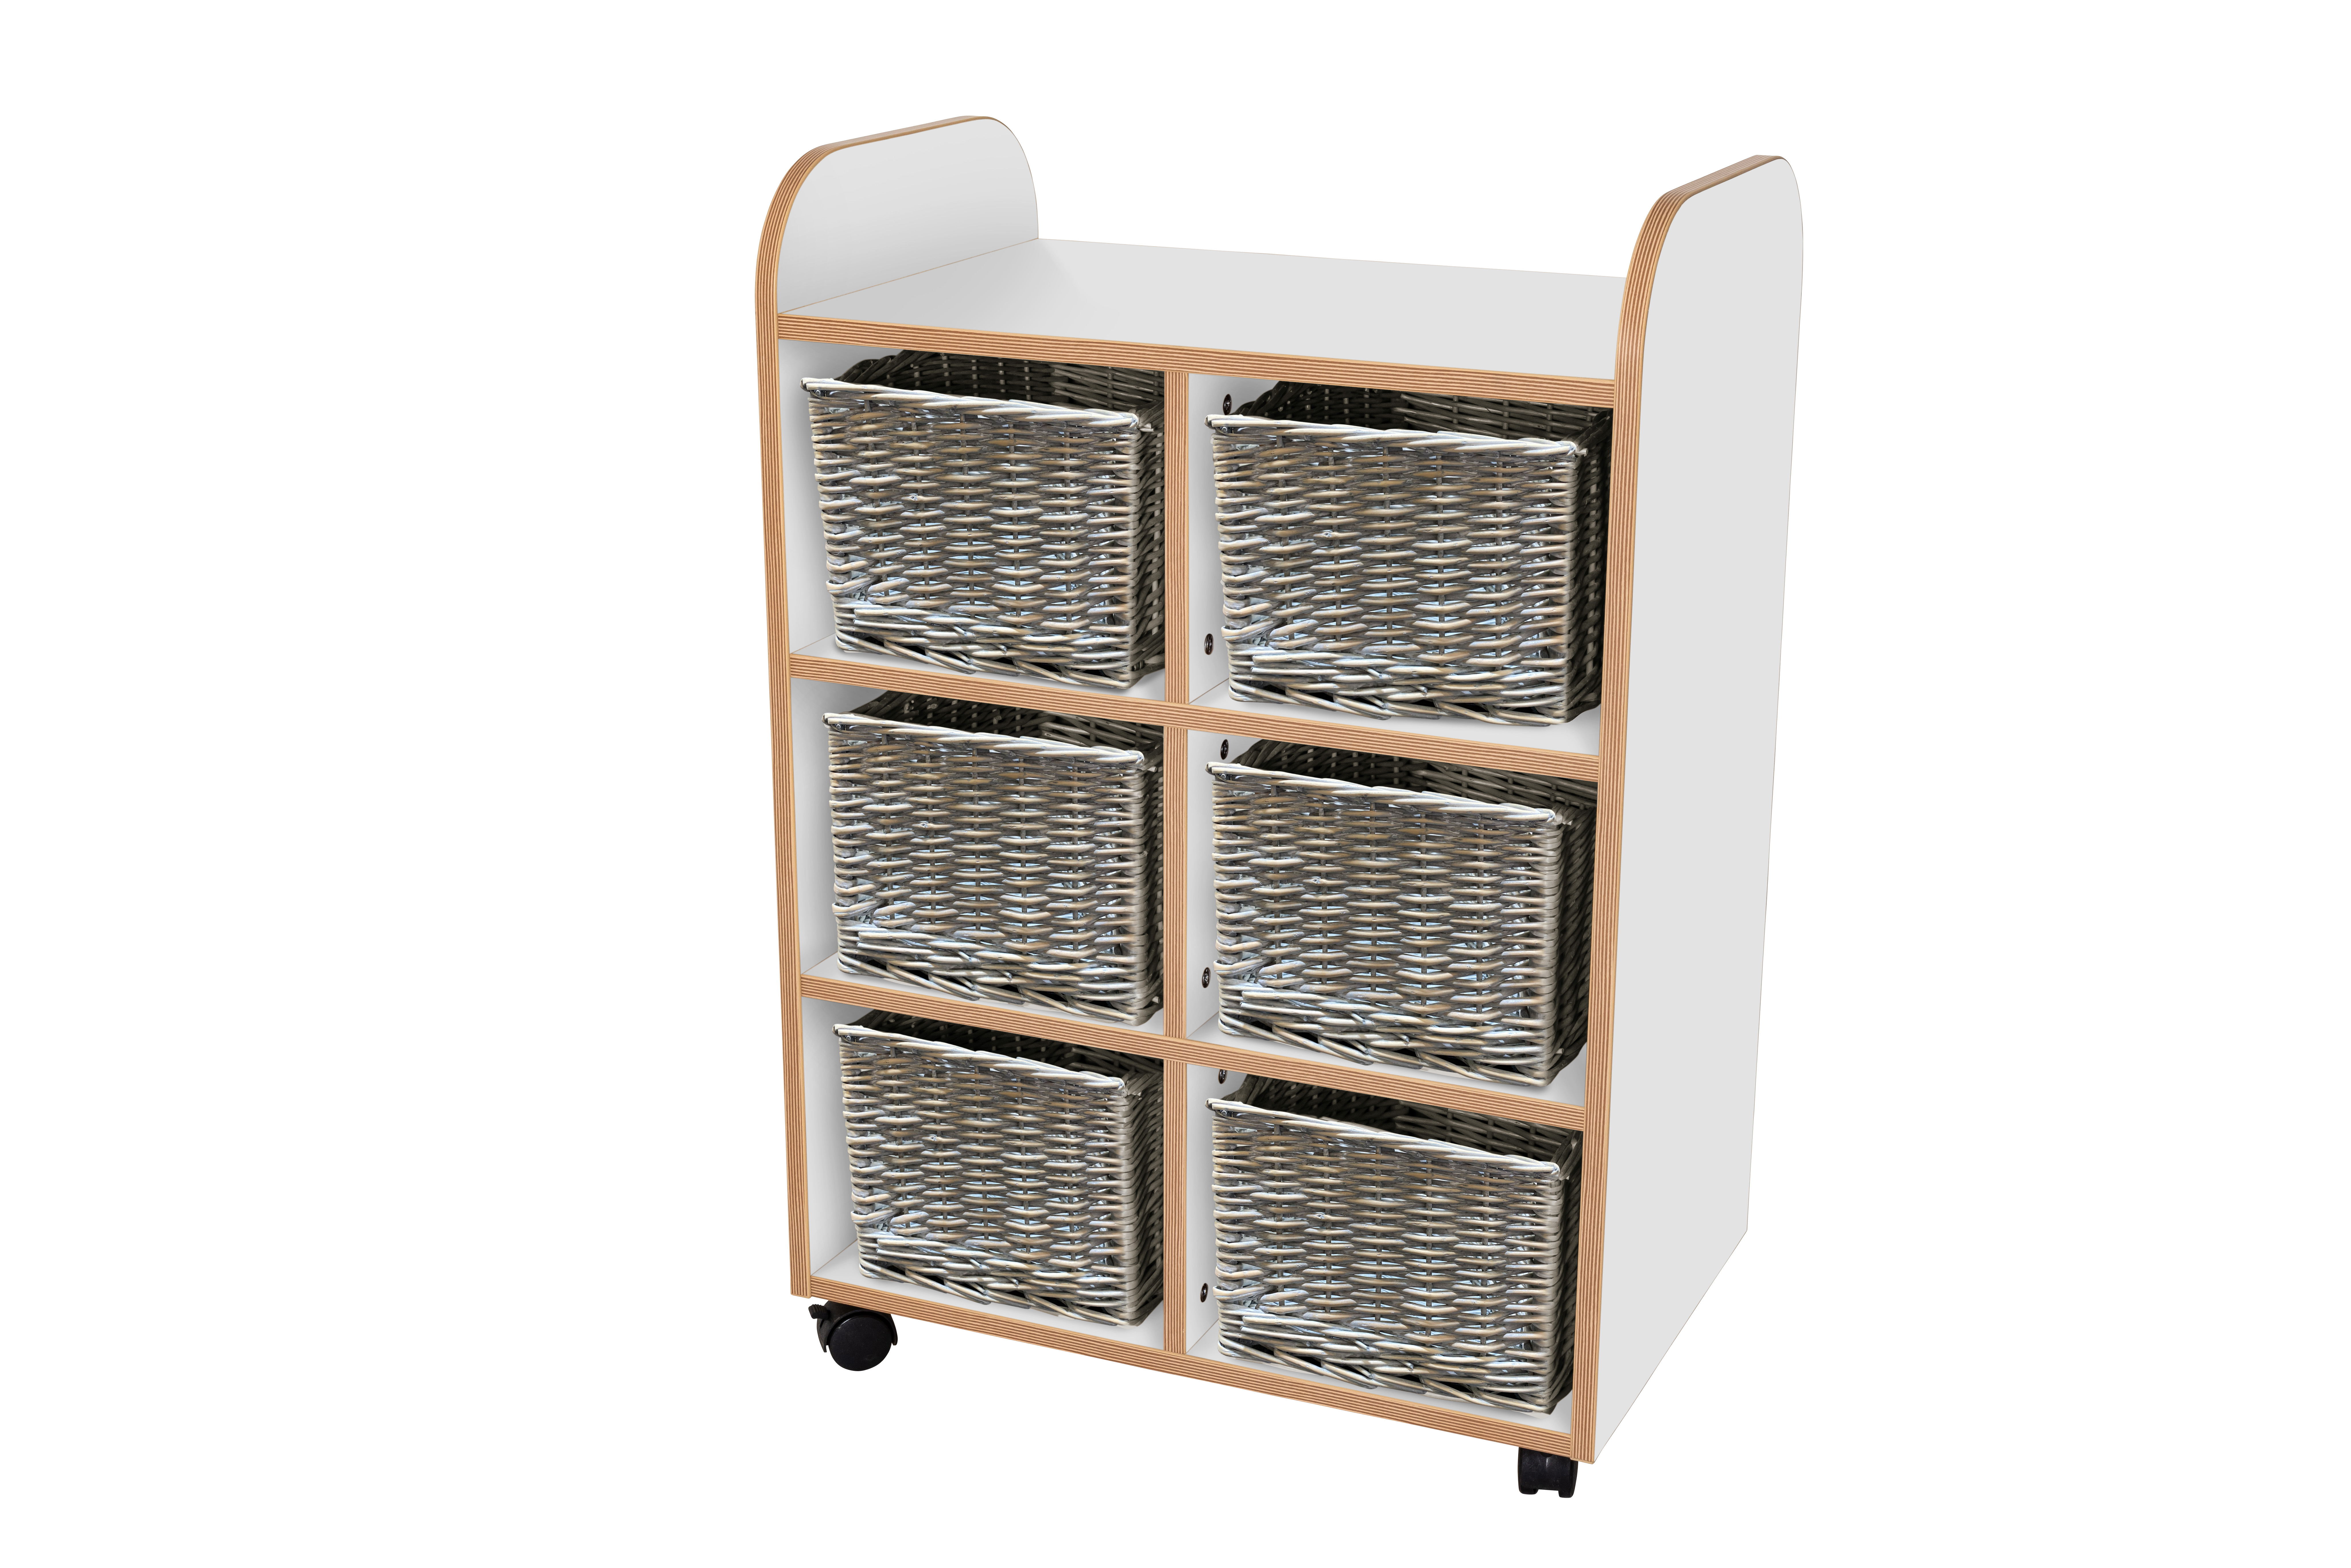 Maplescape 6 tall storage unit with mirr